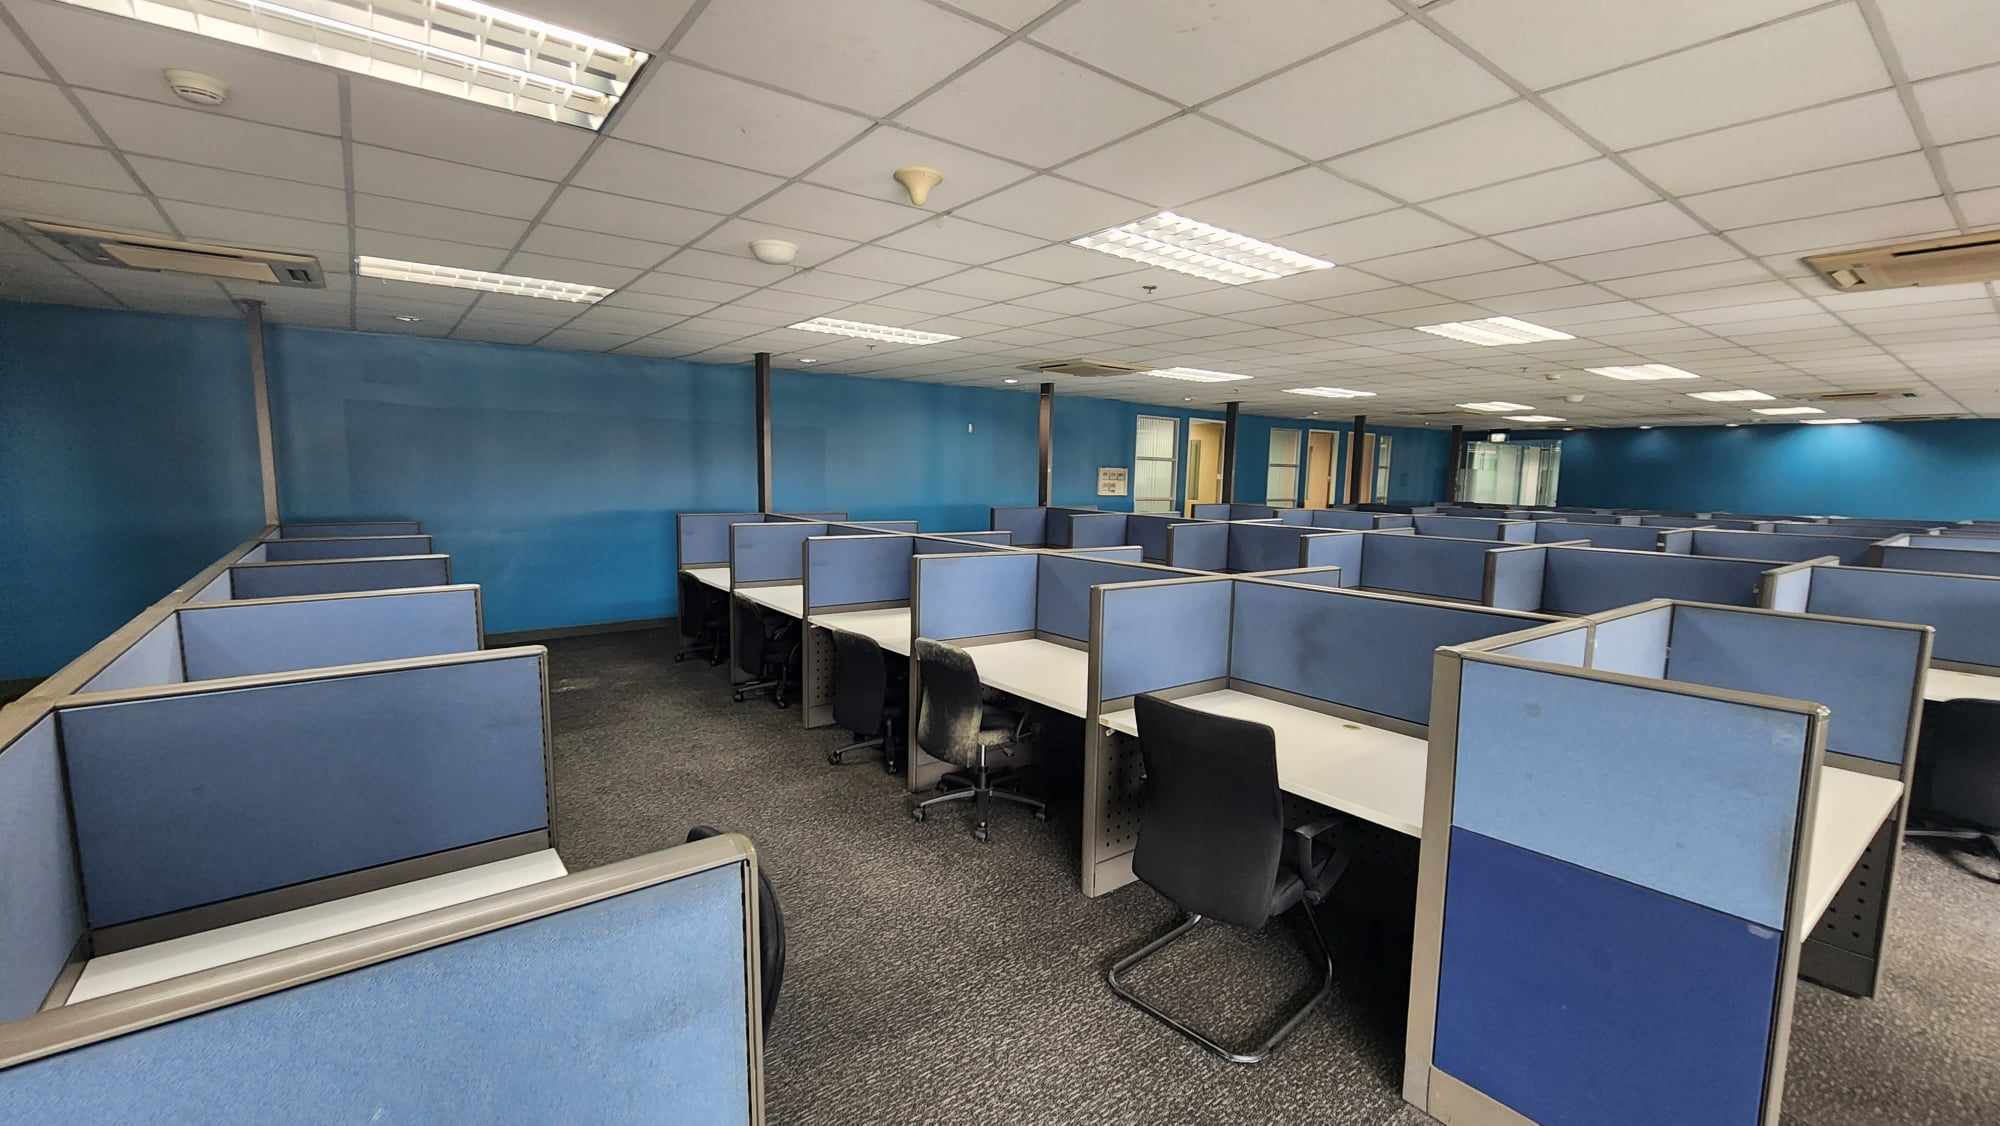 BPO Office Space Rent Lease Mandaluyong City Philippines 2000 sqm